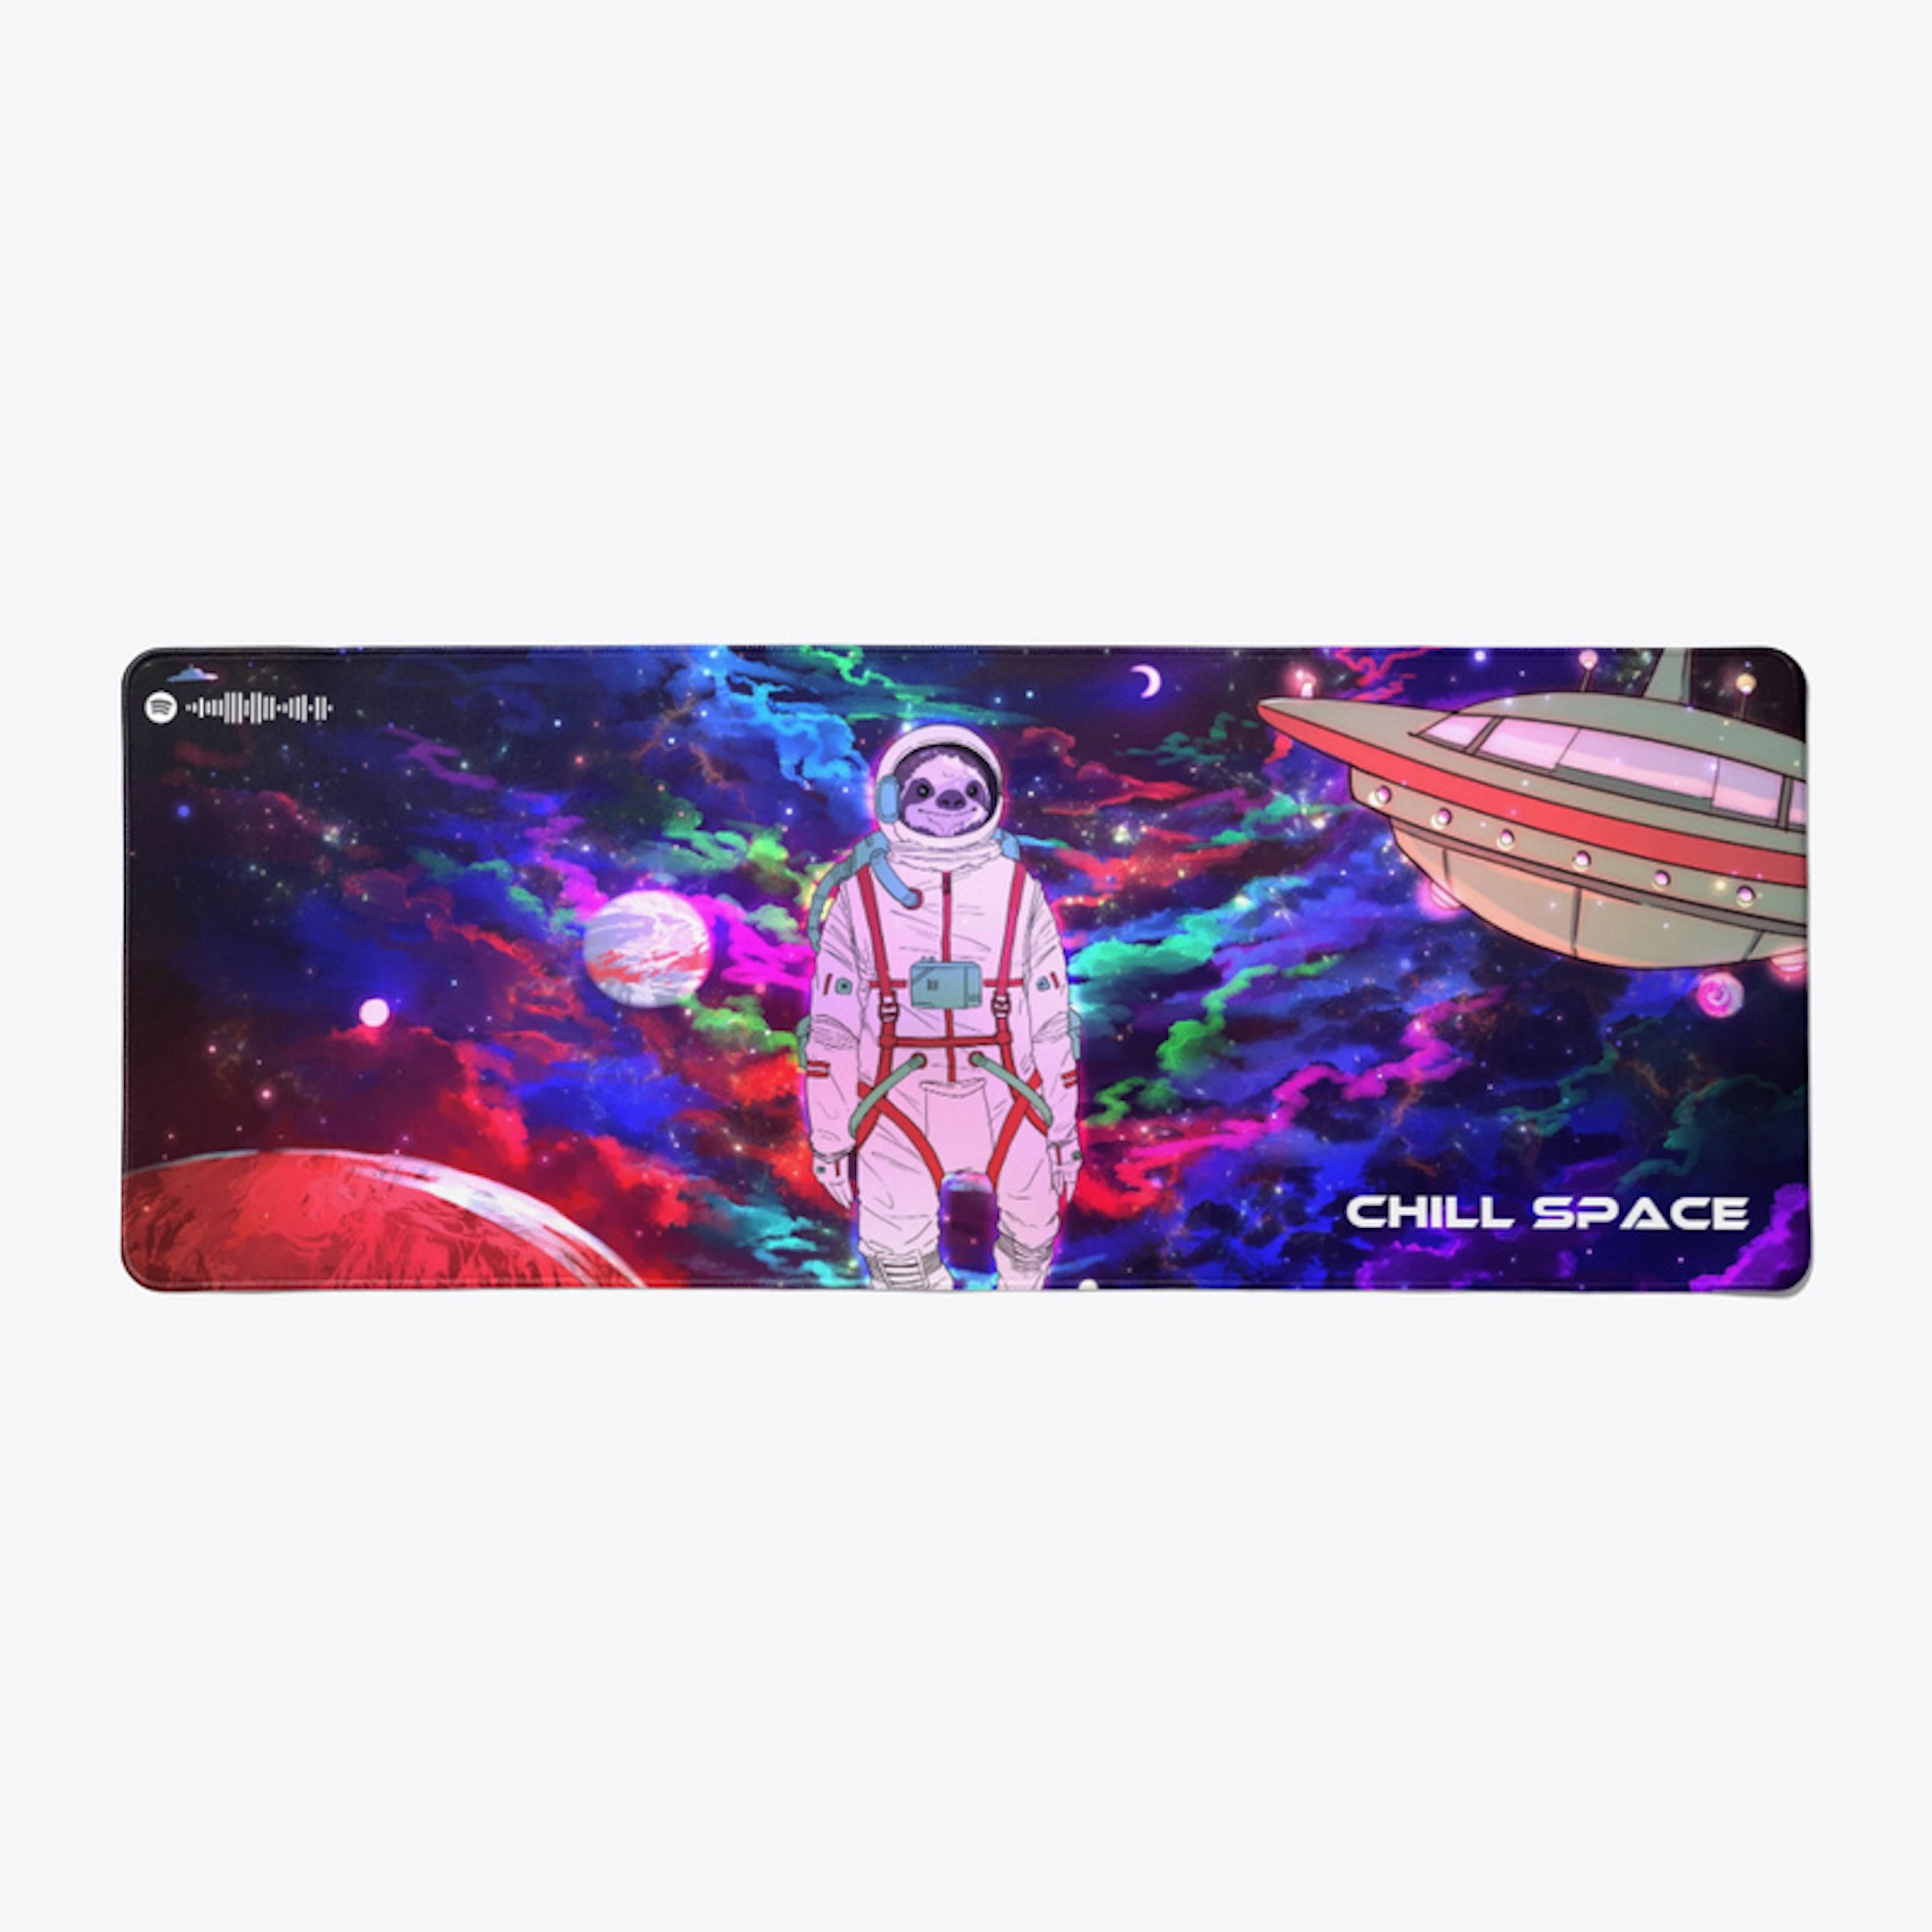 Chill Space deskmat